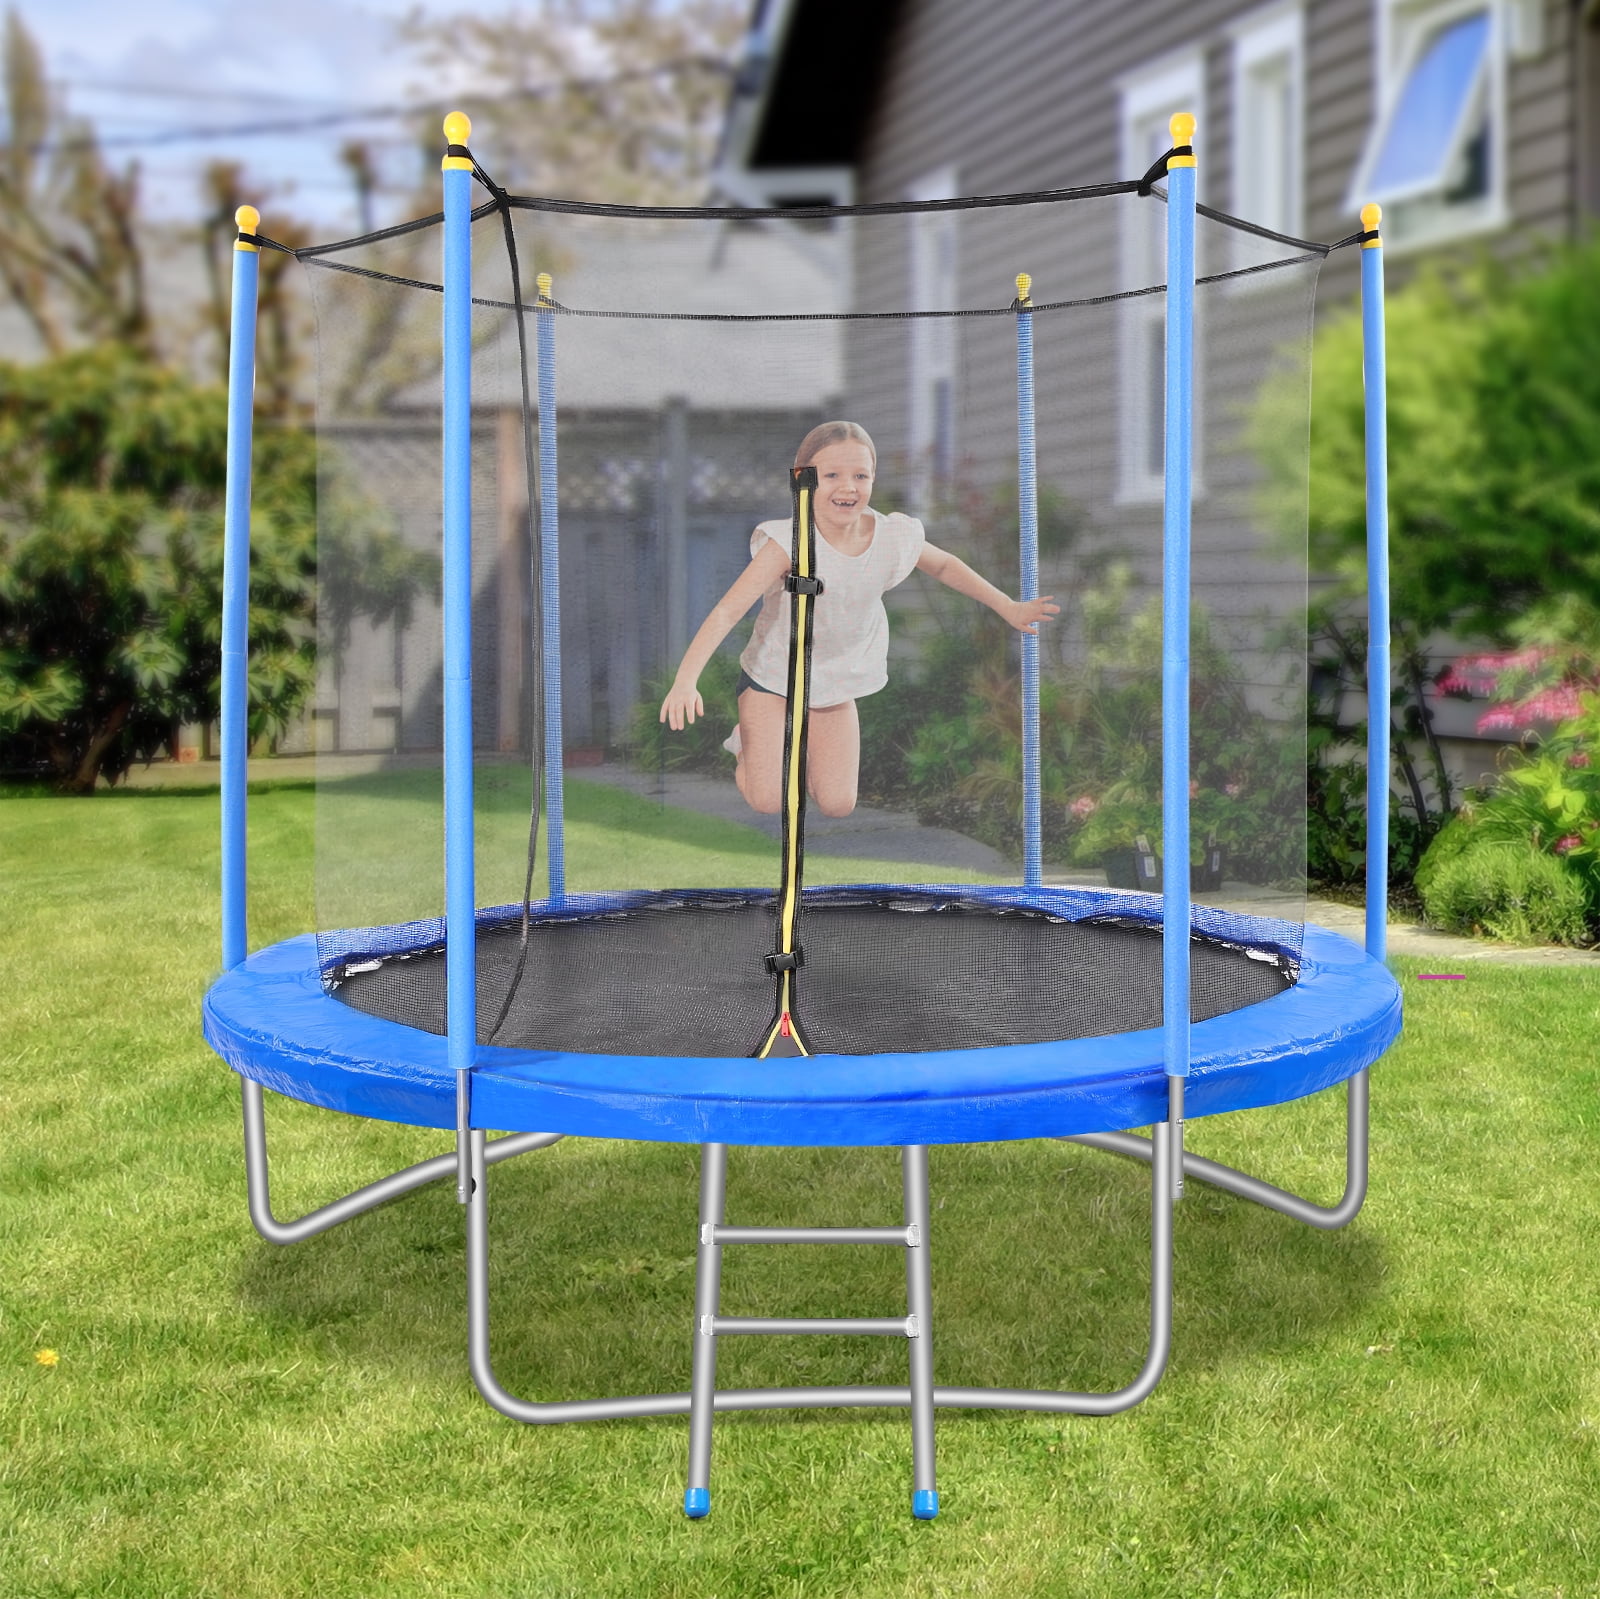 Exercise Fitness Rebounder Jumping Indoor Outdoor w Ladder 264 LBS Capacity 8FT Trampoline with Enclosure for Adults & Kids 